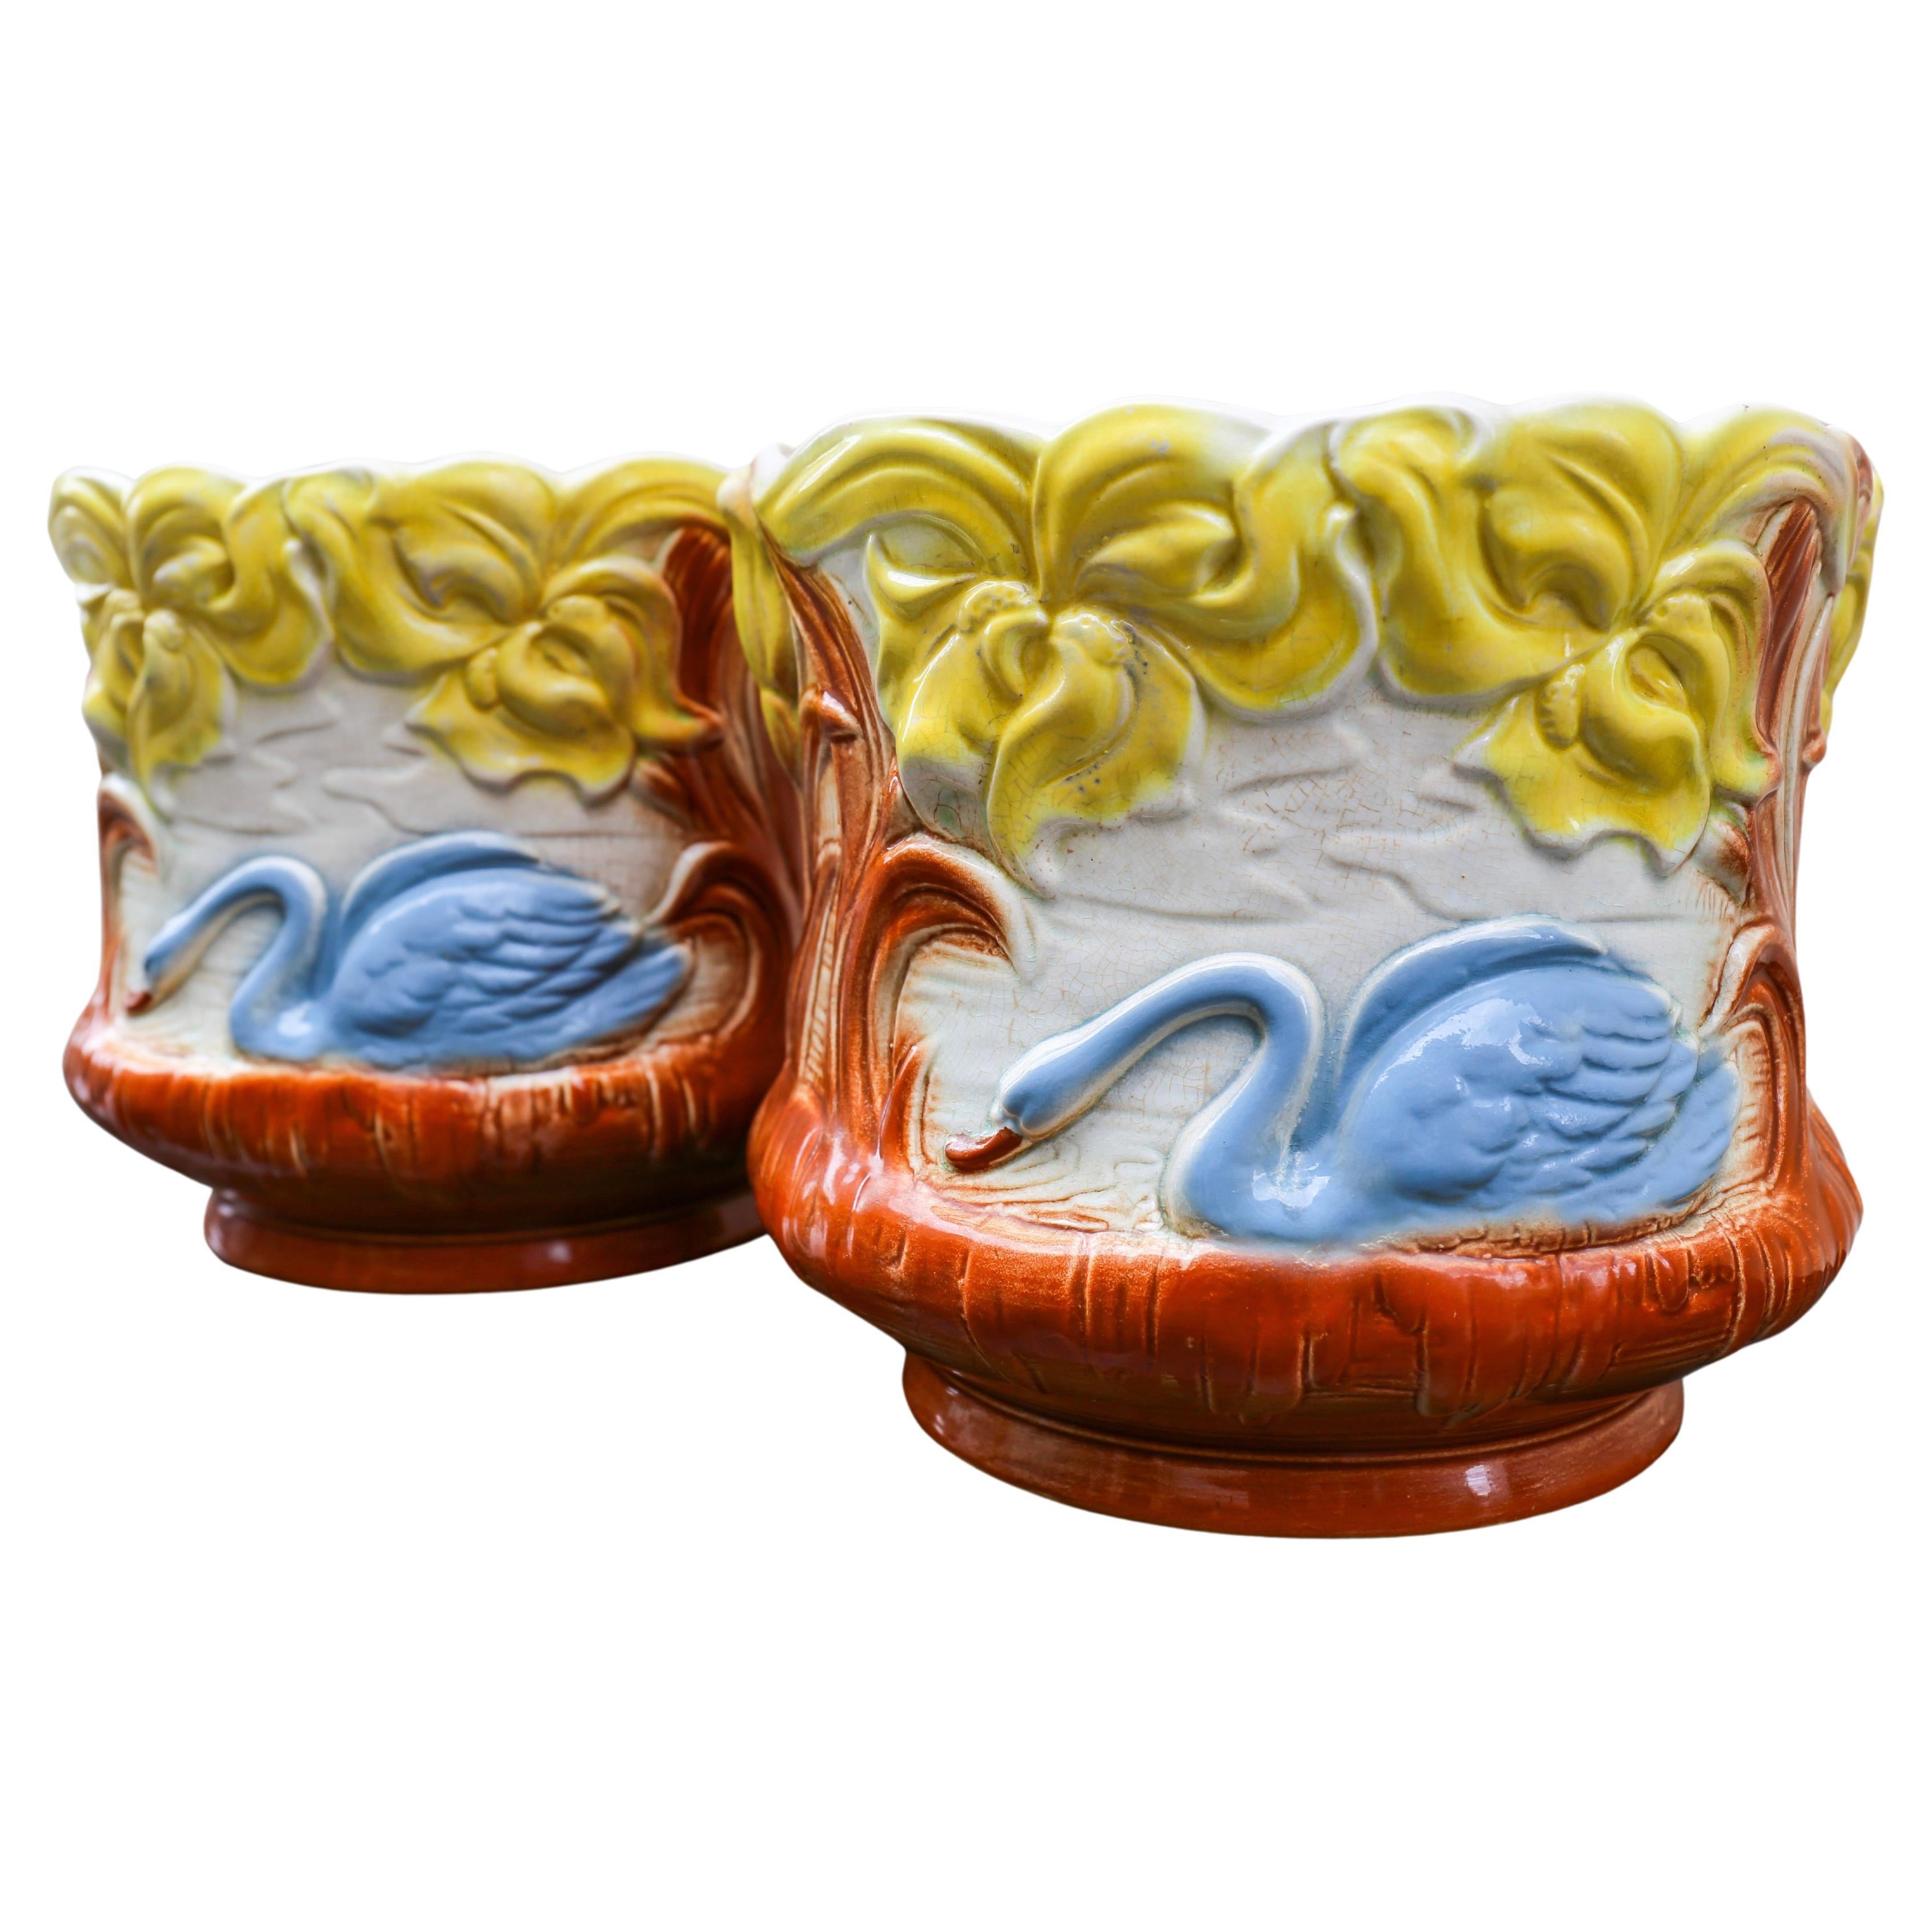 Pair Art Nouveau Swan Planters Jardinieres, Majolica, early 20th Century, France For Sale 1